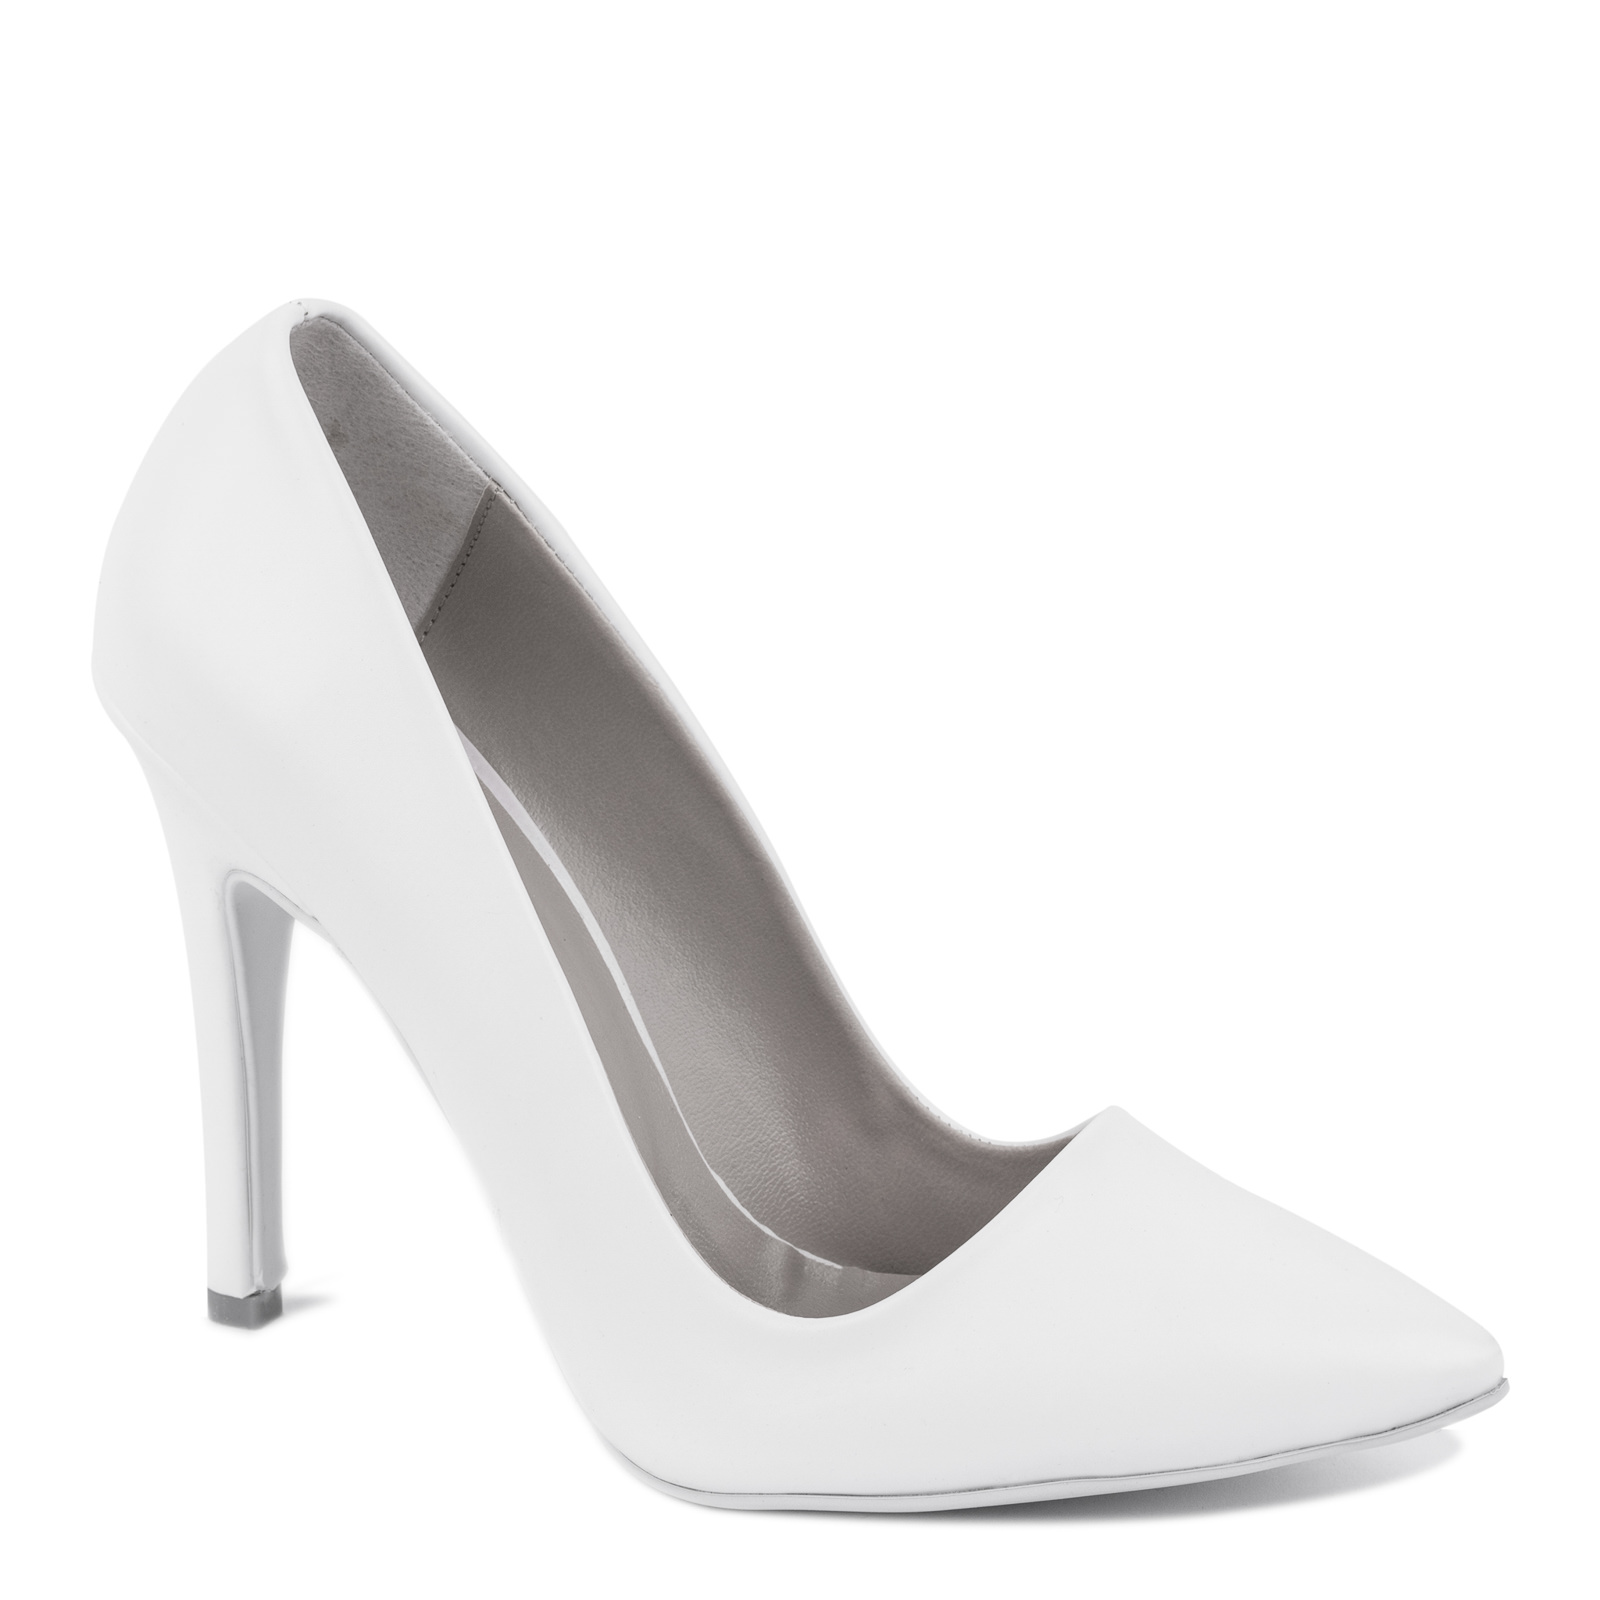 POINTED STILETTO SHOES WITH THIN HEEL - WHITE